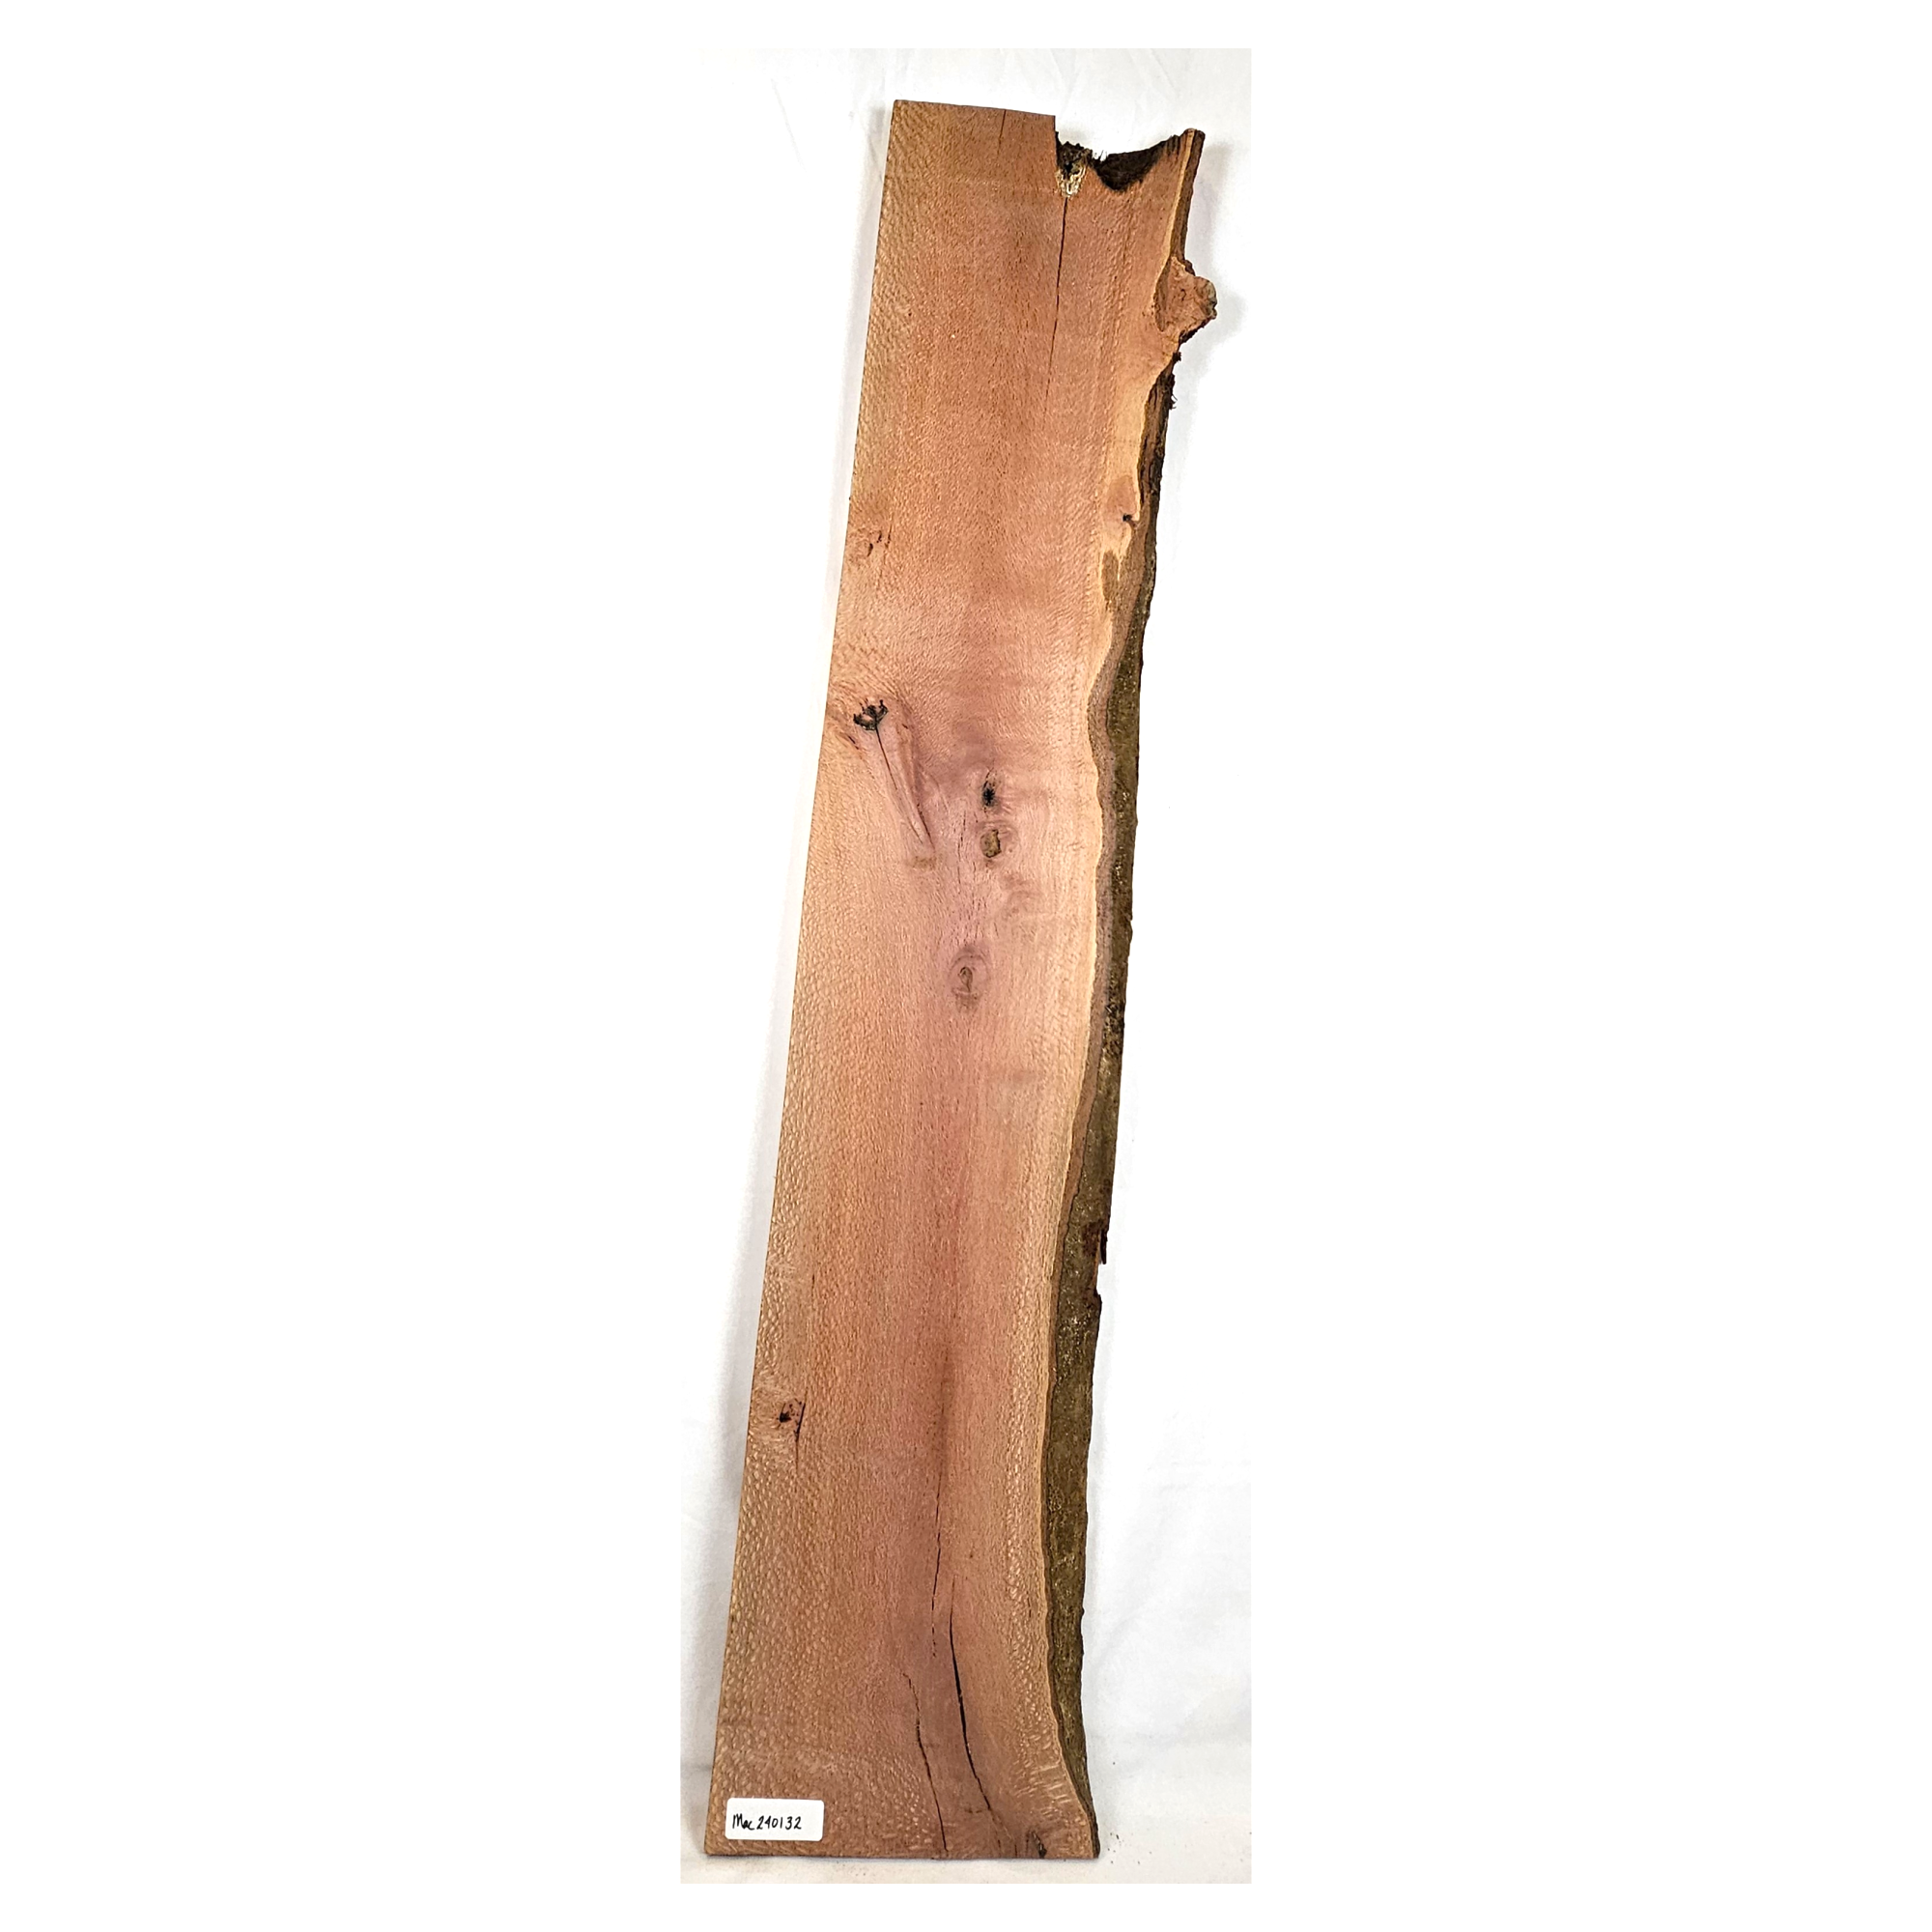 Nice macadamia slab/board with rich color, small knots, some face check and live edge.